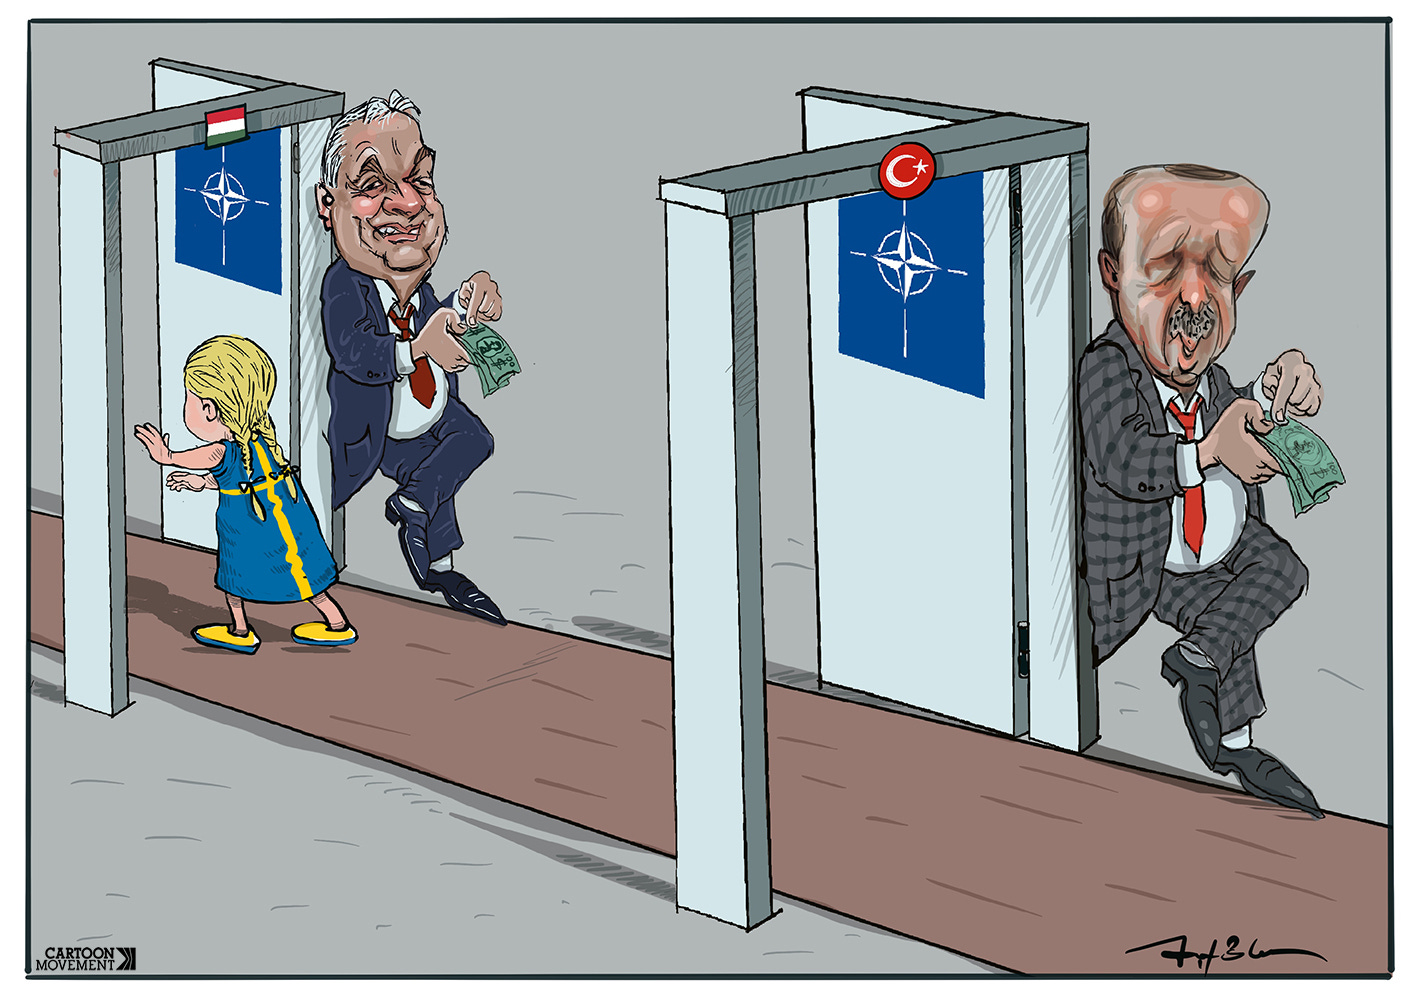 Cartoon showing a Swedish girl passing through two gates to join Nato. At the first gate with an open door stands Erdogan, looking smug as he is counting money. At the second gate with an open door stands Orban, also counting money and looking smug.